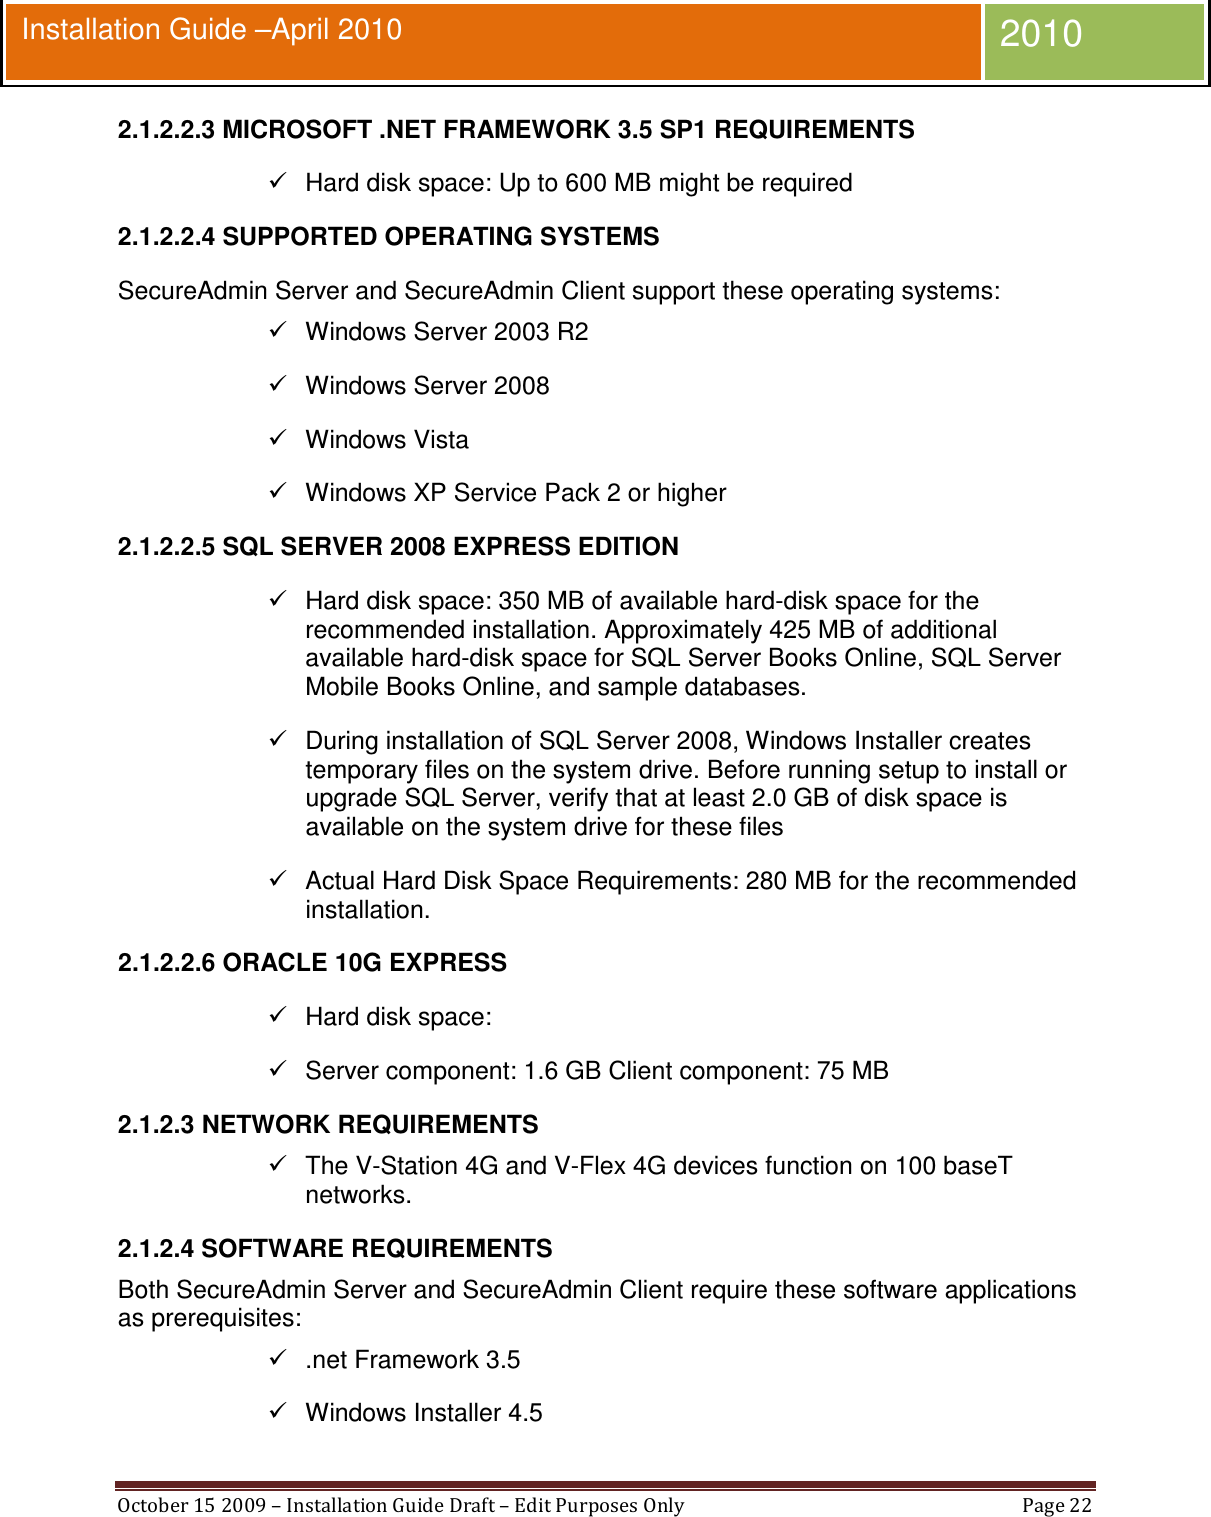  October 15 2009 – Installation Guide Draft – Edit Purposes Only  Page 22  Installation Guide –April 2010 2010 2.1.2.2.3 MICROSOFT .NET FRAMEWORK 3.5 SP1 REQUIREMENTS   Hard disk space: Up to 600 MB might be required 2.1.2.2.4 SUPPORTED OPERATING SYSTEMS SecureAdmin Server and SecureAdmin Client support these operating systems:   Windows Server 2003 R2   Windows Server 2008   Windows Vista   Windows XP Service Pack 2 or higher 2.1.2.2.5 SQL SERVER 2008 EXPRESS EDITION   Hard disk space: 350 MB of available hard-disk space for the recommended installation. Approximately 425 MB of additional available hard-disk space for SQL Server Books Online, SQL Server Mobile Books Online, and sample databases.   During installation of SQL Server 2008, Windows Installer creates temporary files on the system drive. Before running setup to install or upgrade SQL Server, verify that at least 2.0 GB of disk space is available on the system drive for these files   Actual Hard Disk Space Requirements: 280 MB for the recommended installation. 2.1.2.2.6 ORACLE 10G EXPRESS   Hard disk space:   Server component: 1.6 GB Client component: 75 MB 2.1.2.3 NETWORK REQUIREMENTS   The V-Station 4G and V-Flex 4G devices function on 100 baseT networks. 2.1.2.4 SOFTWARE REQUIREMENTS Both SecureAdmin Server and SecureAdmin Client require these software applications as prerequisites:   .net Framework 3.5   Windows Installer 4.5 